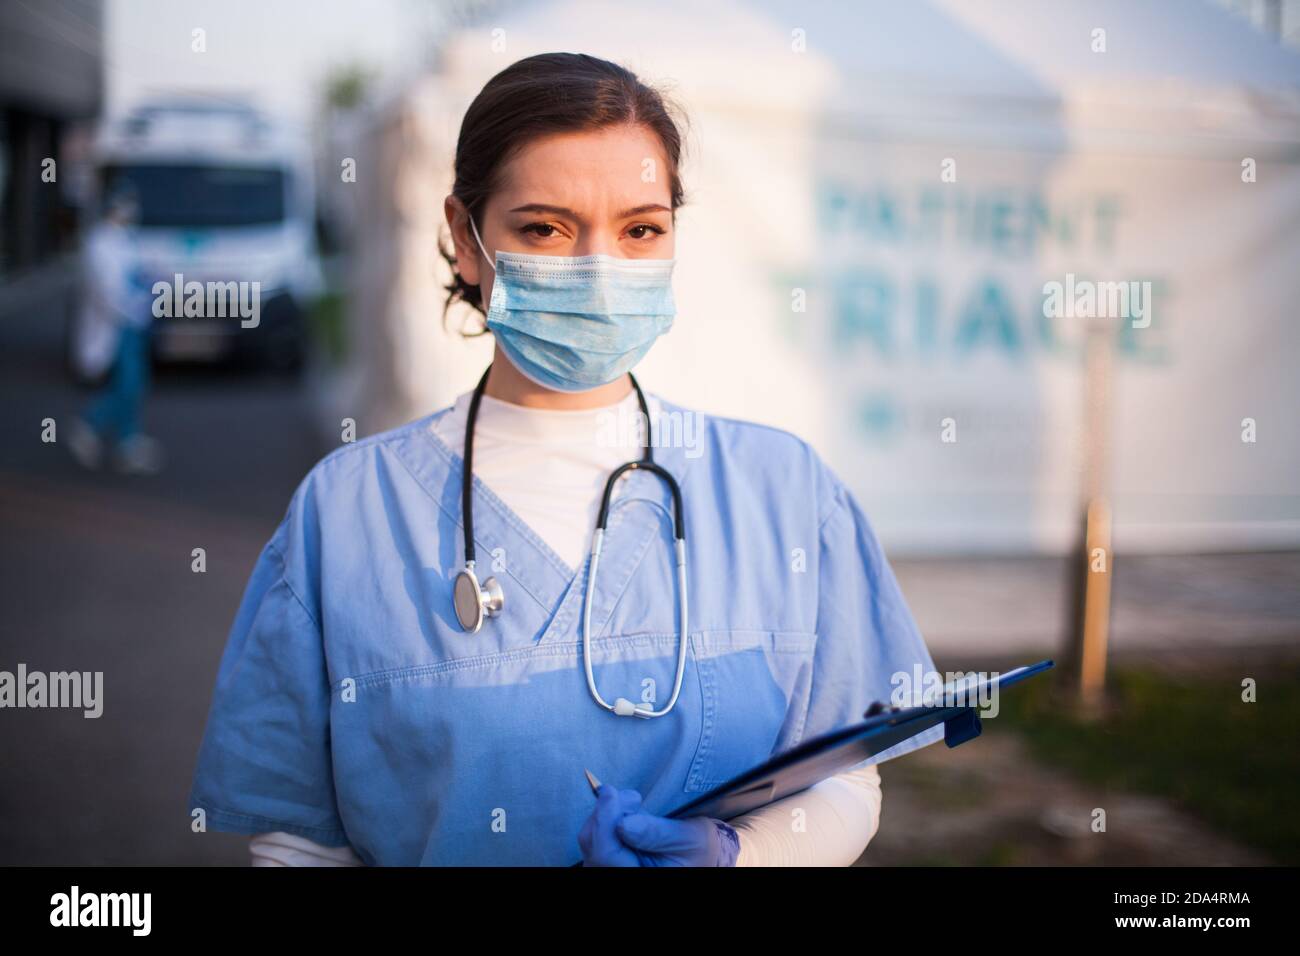 Portrait of very tired & exhausted UK NHS ICU doctor in front of hospital,emergency patient triage tent in background,Coronavirus COVID-19 pandemic Stock Photo